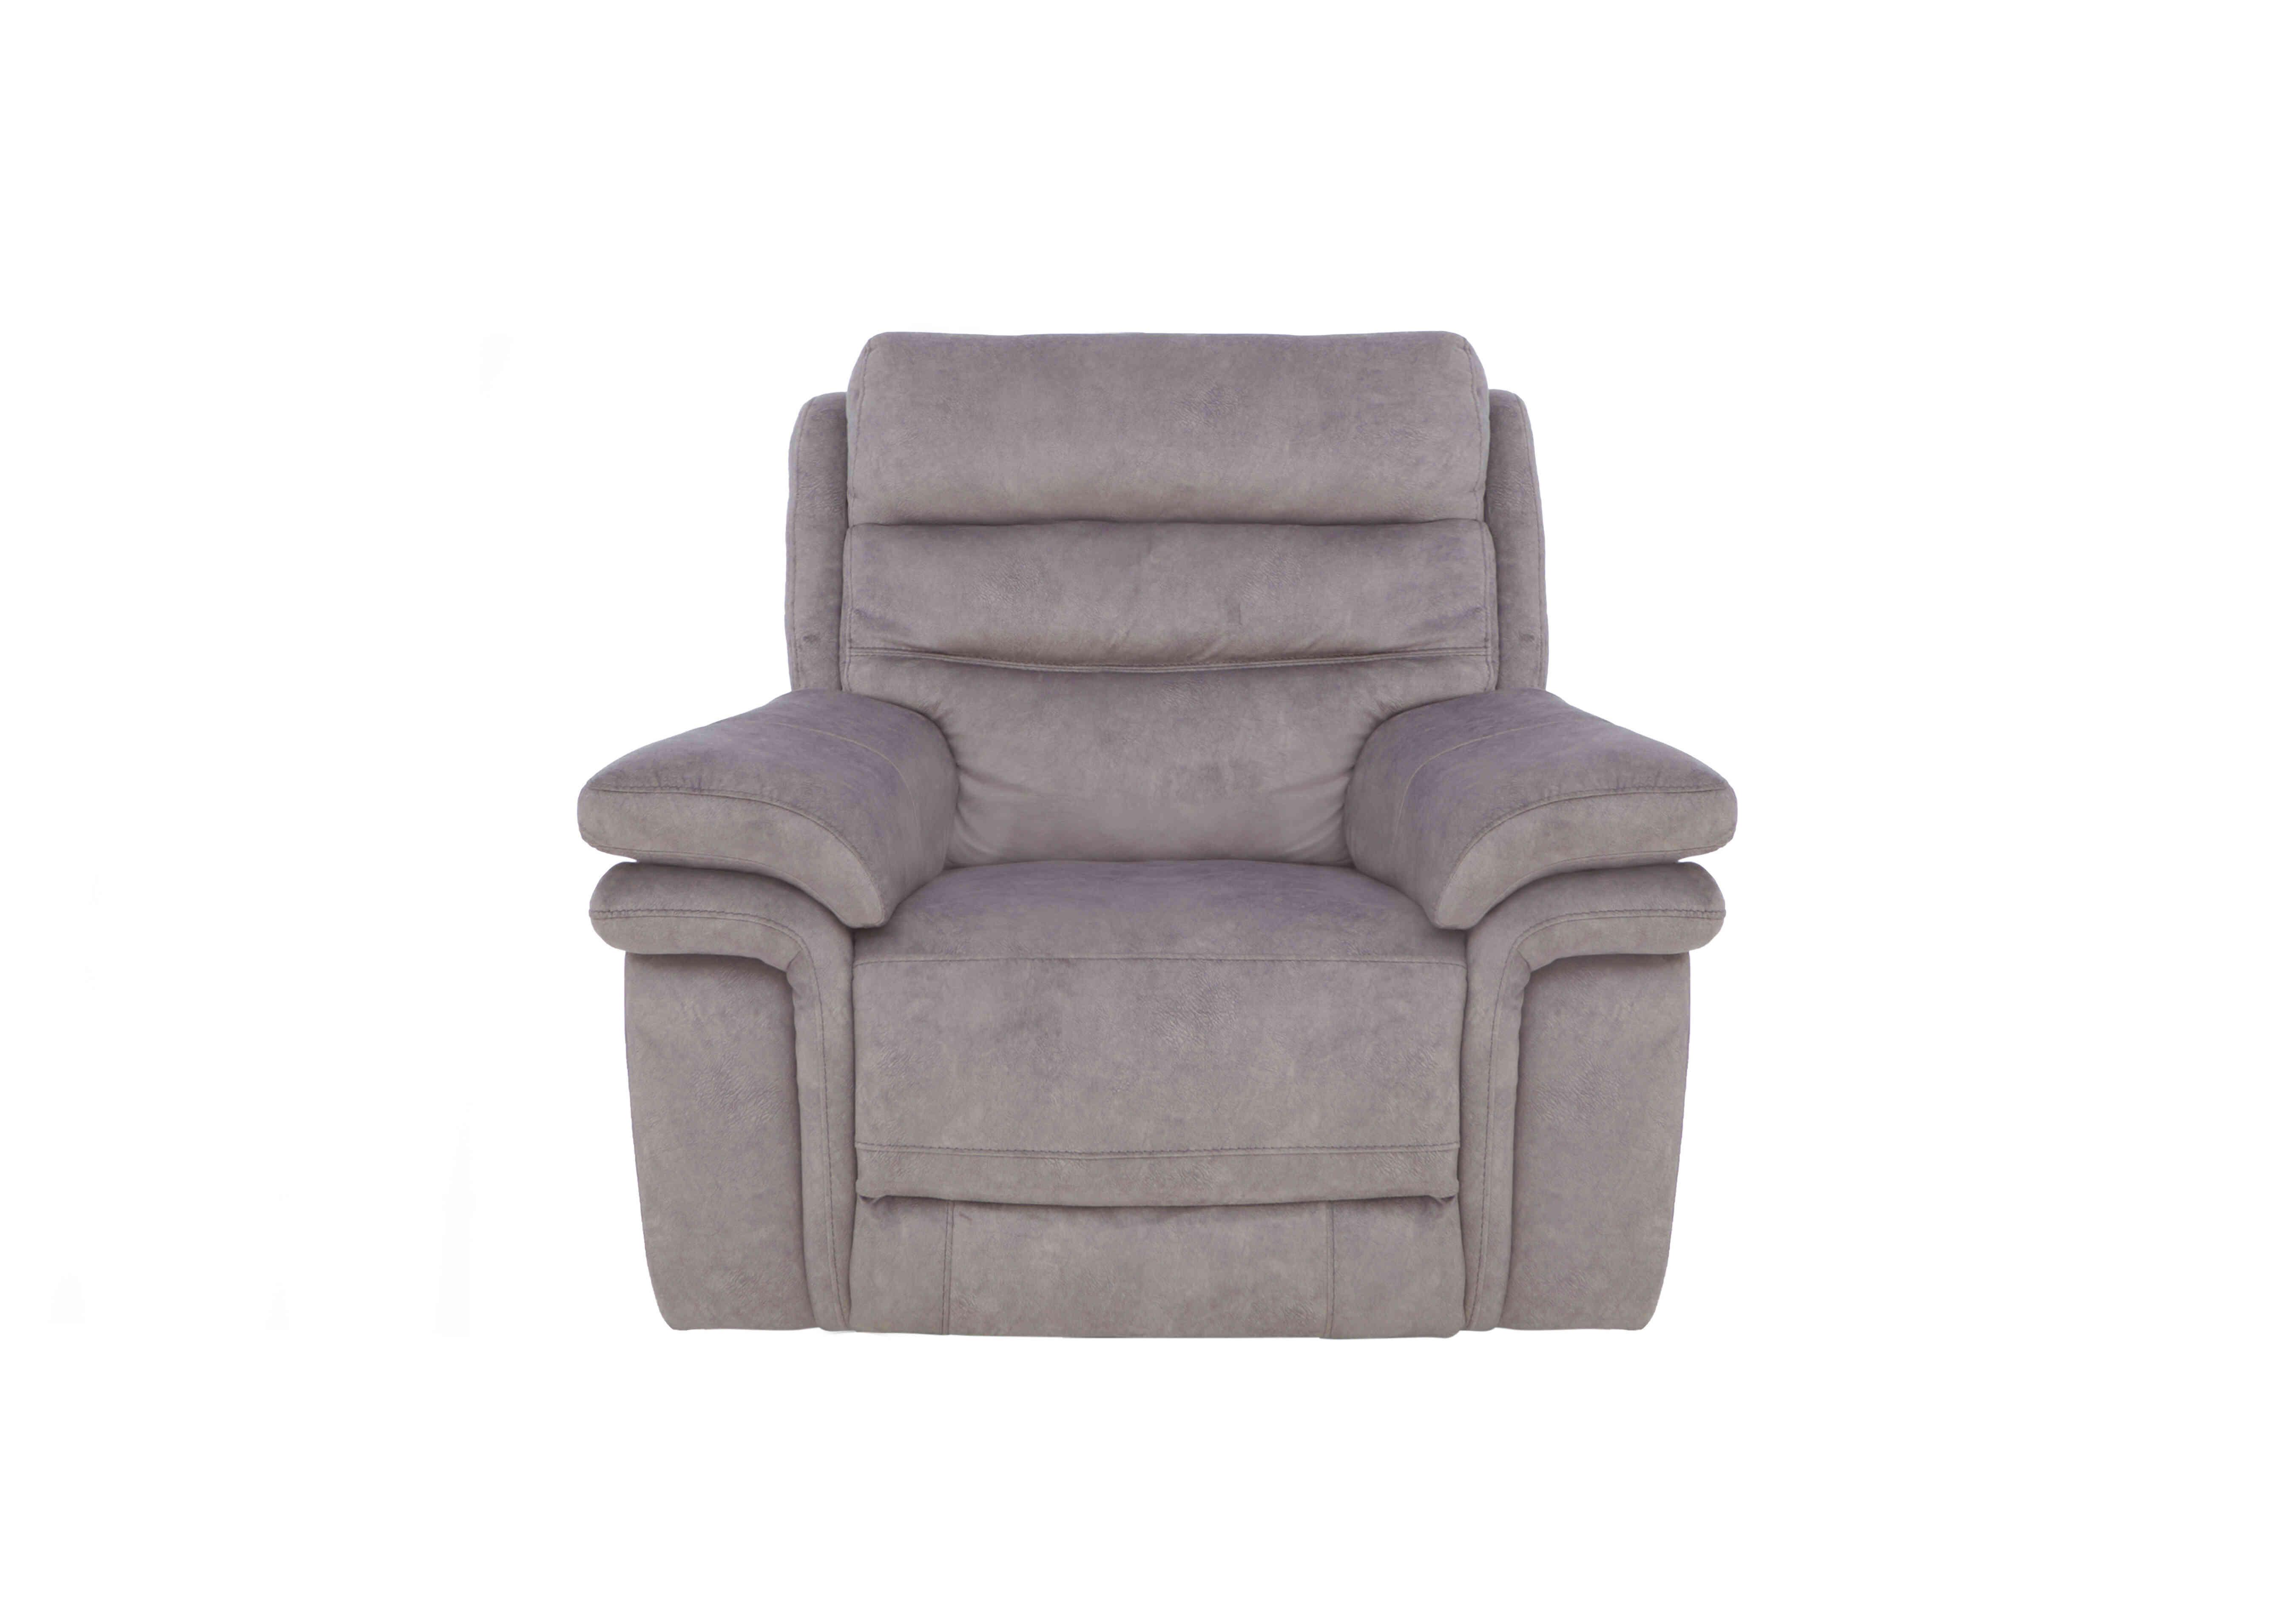 Berlin Fabric Chair in Light Grey Be-0102 on Furniture Village